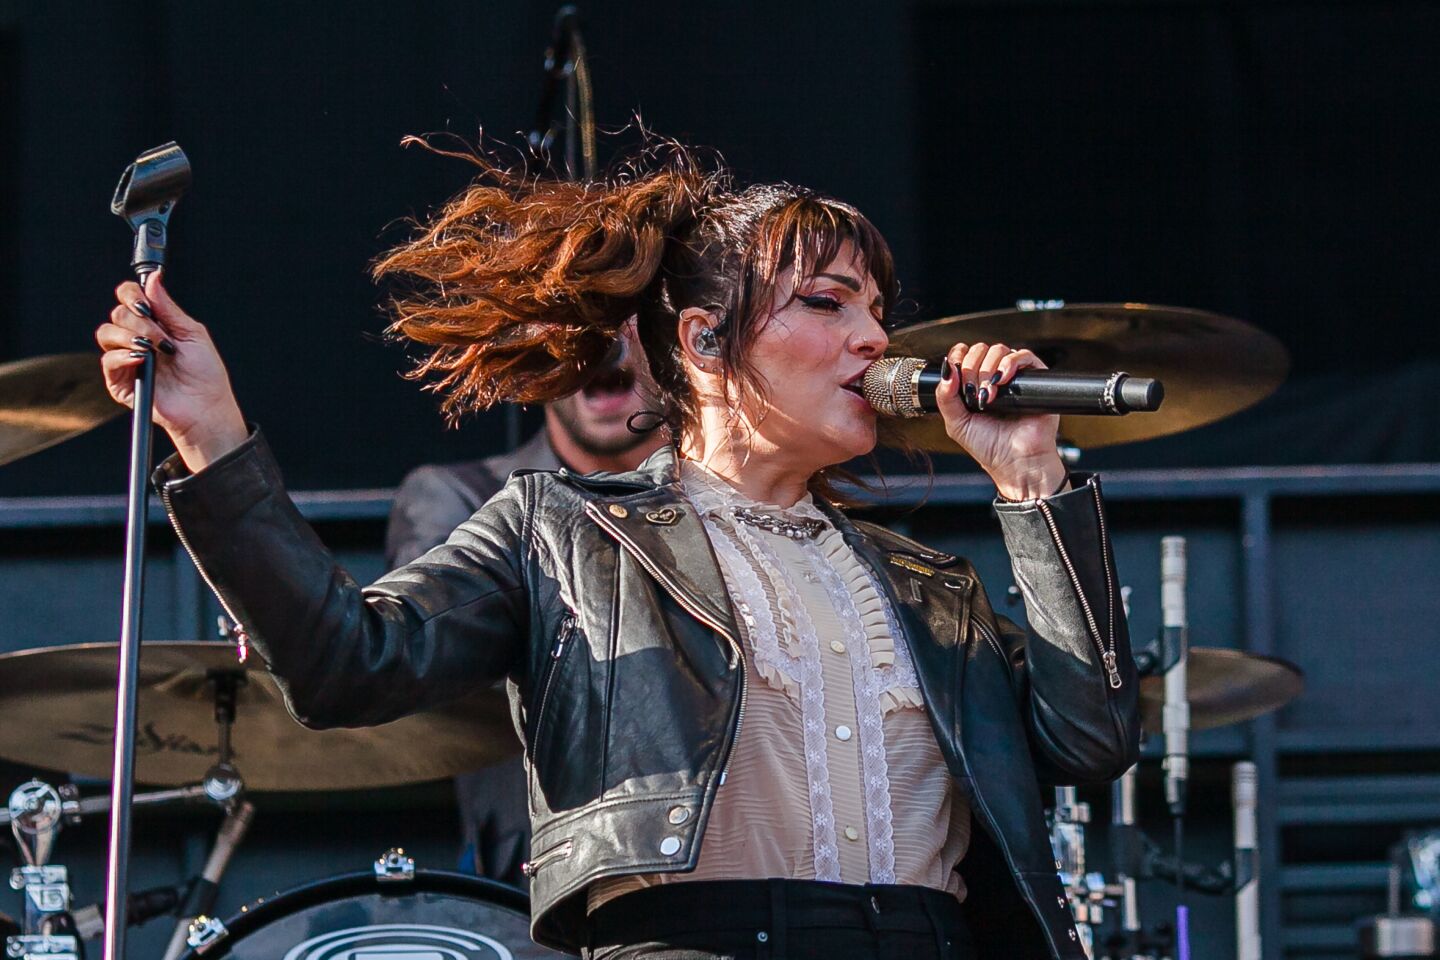 Aimee Allen from The Interrupters sings at Petco Park during the Hella Mega Tour in downtown San Diego on August 29, 2021.